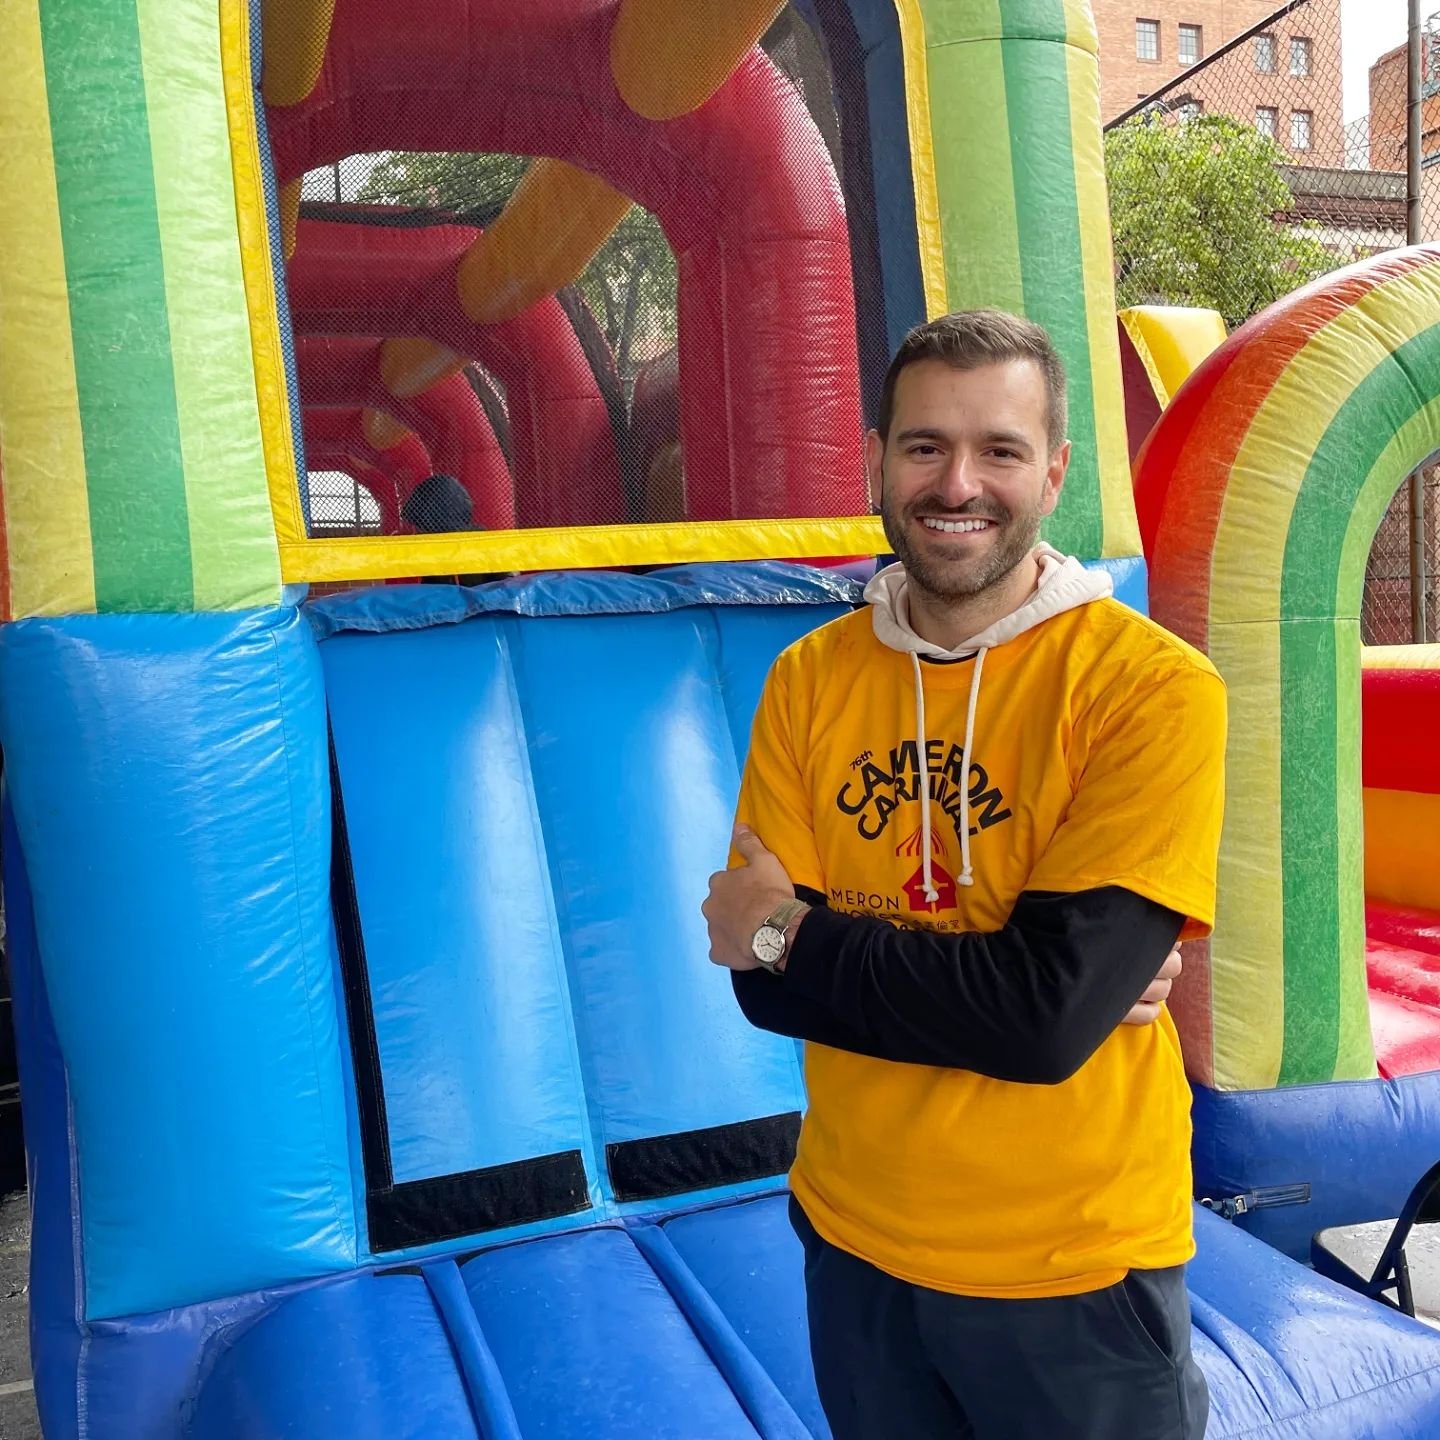 🎪A little rain couldn't keep the annual @cameronhousesf Carnival from being a day of joy and community! For the 2nd year in a row, I was on bounce house duty 😂 

Cameron House plays such an important role in Chinatown and I'm honored to work with t